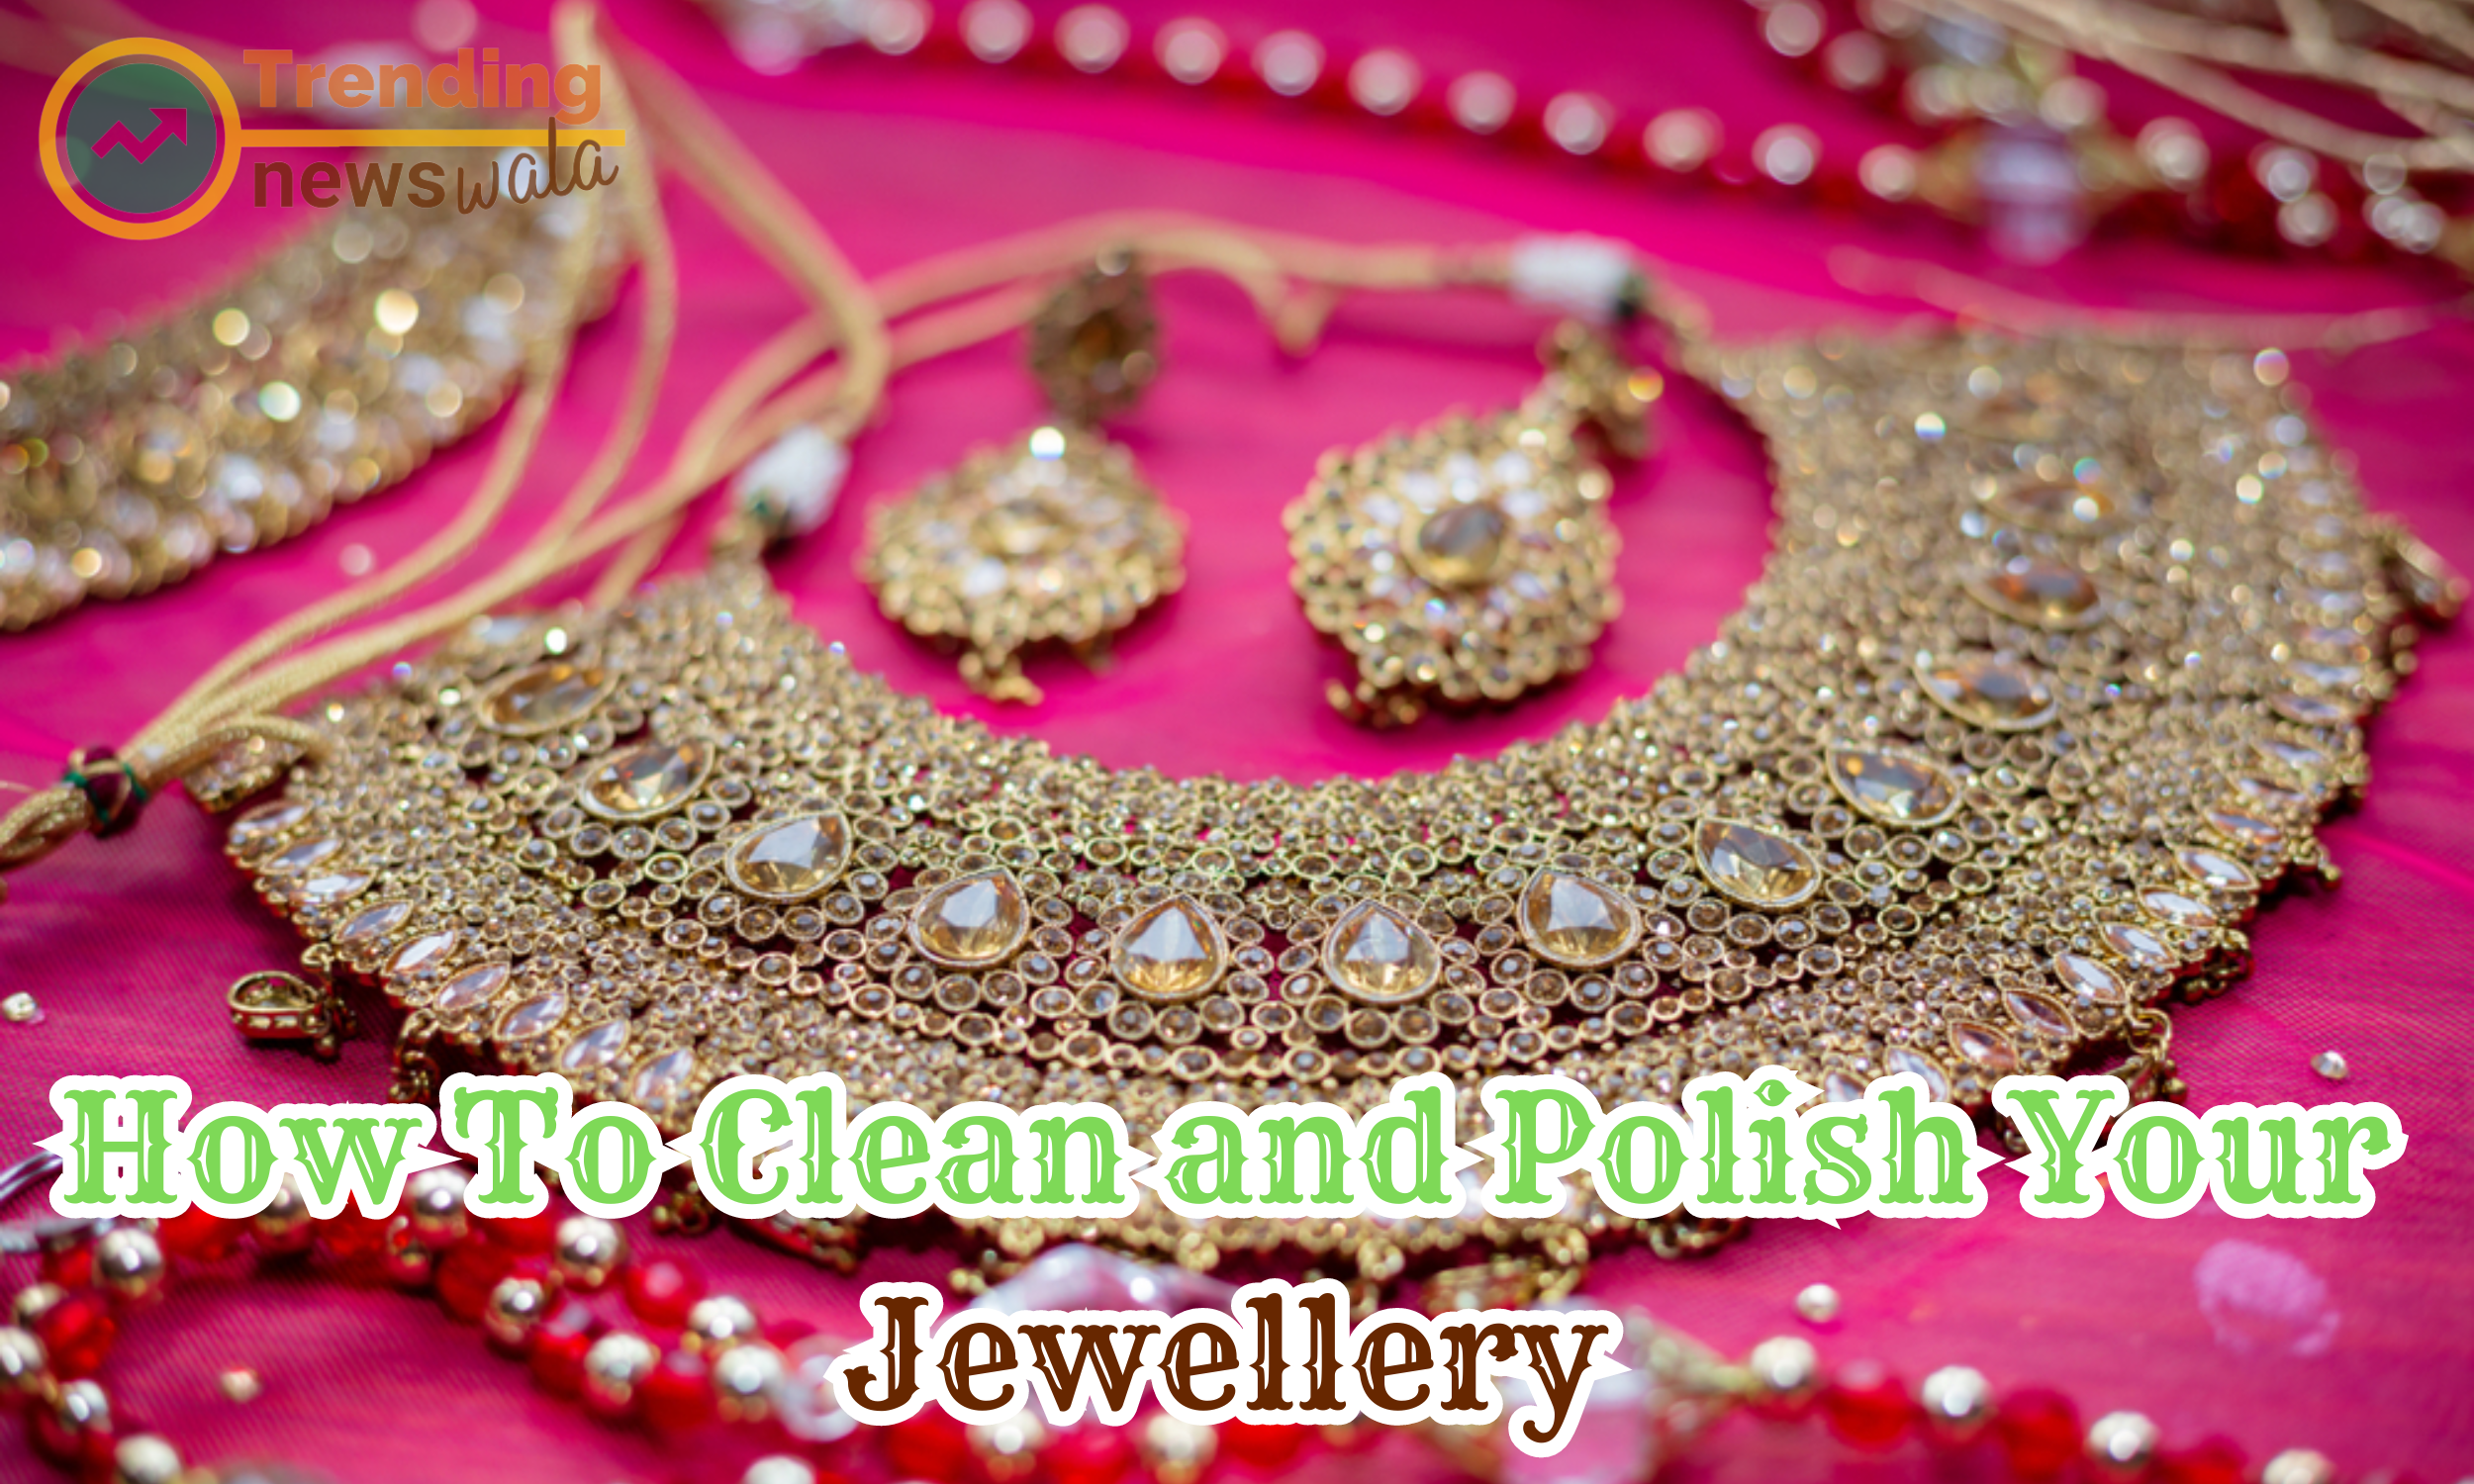 How To Clean and Polish Your Jewellery